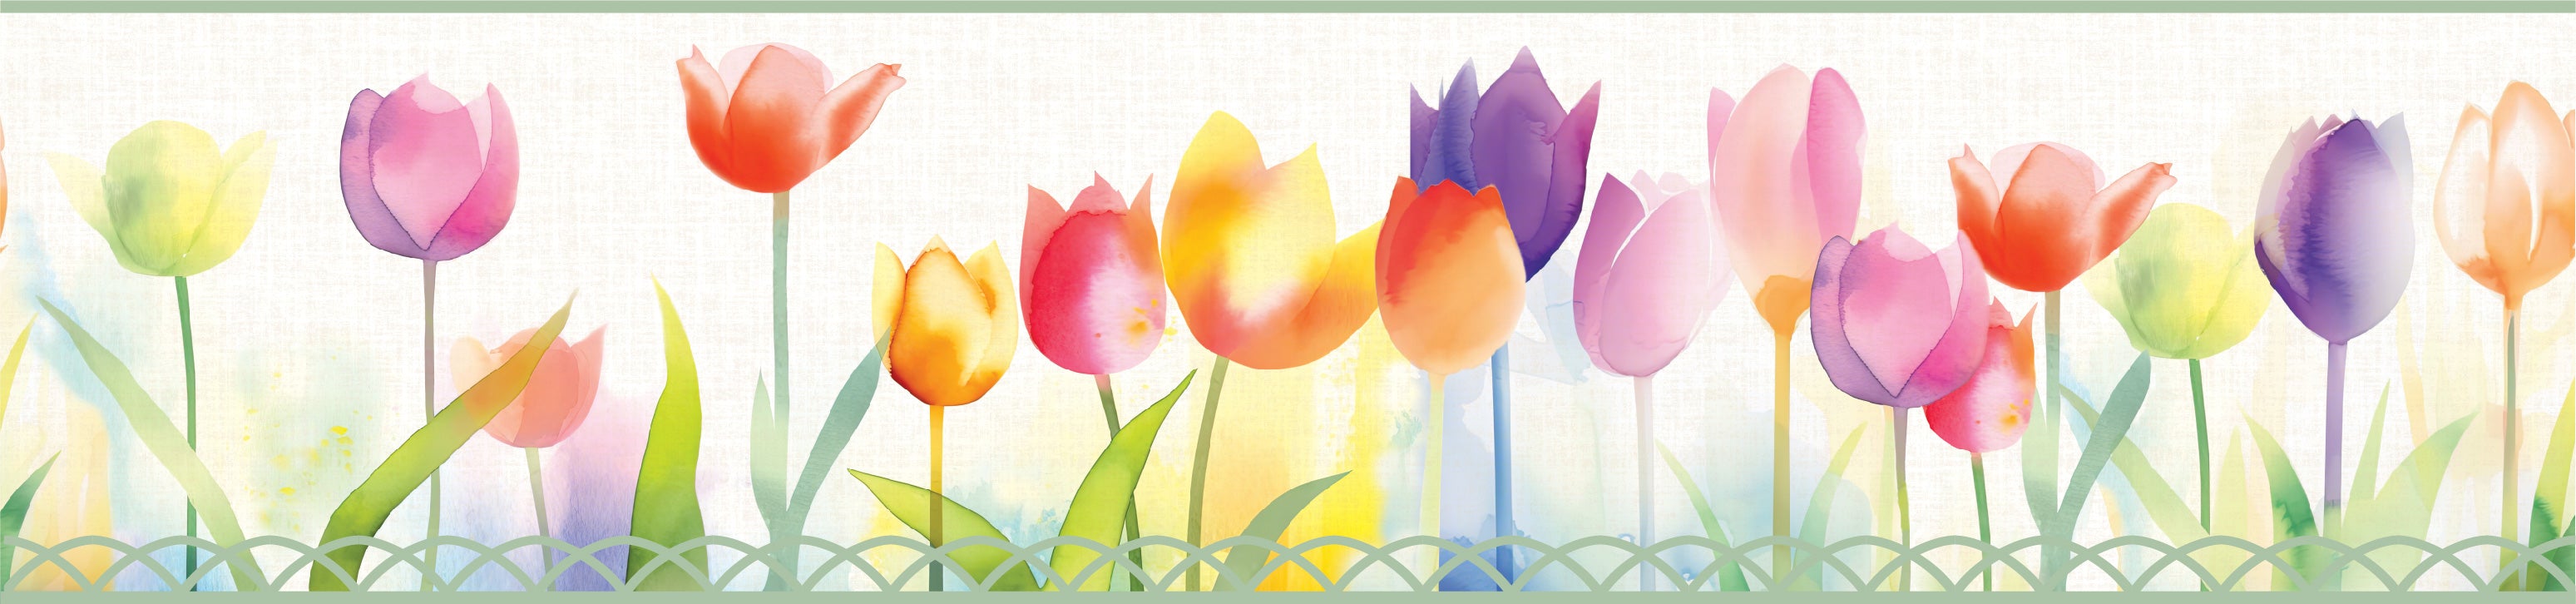 GB5010 Spring Tulips Peel and Stick Wallpaper Border 10in or 8in Height x 15ft Long Purple Orange Pink